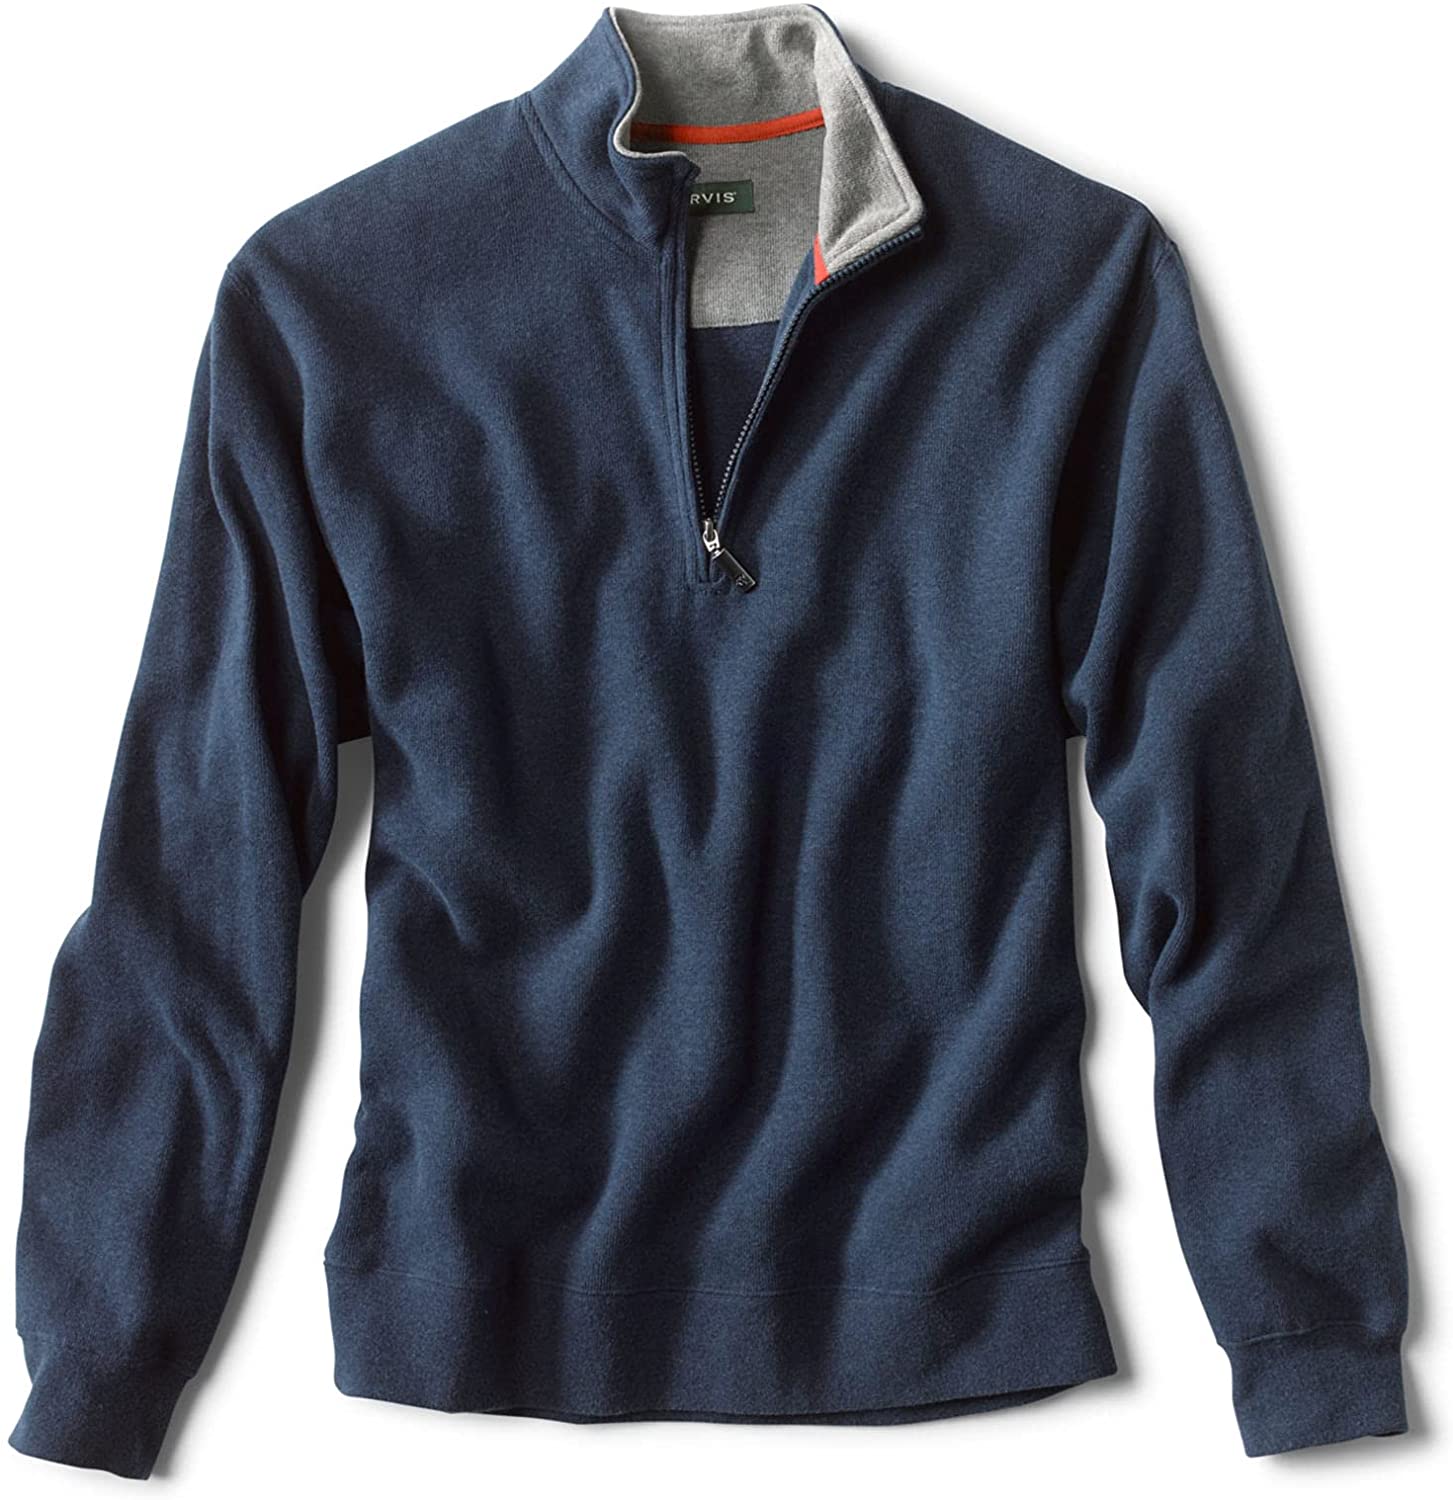 Softest 1/4 Zip Pullover in Navyheathr from front view